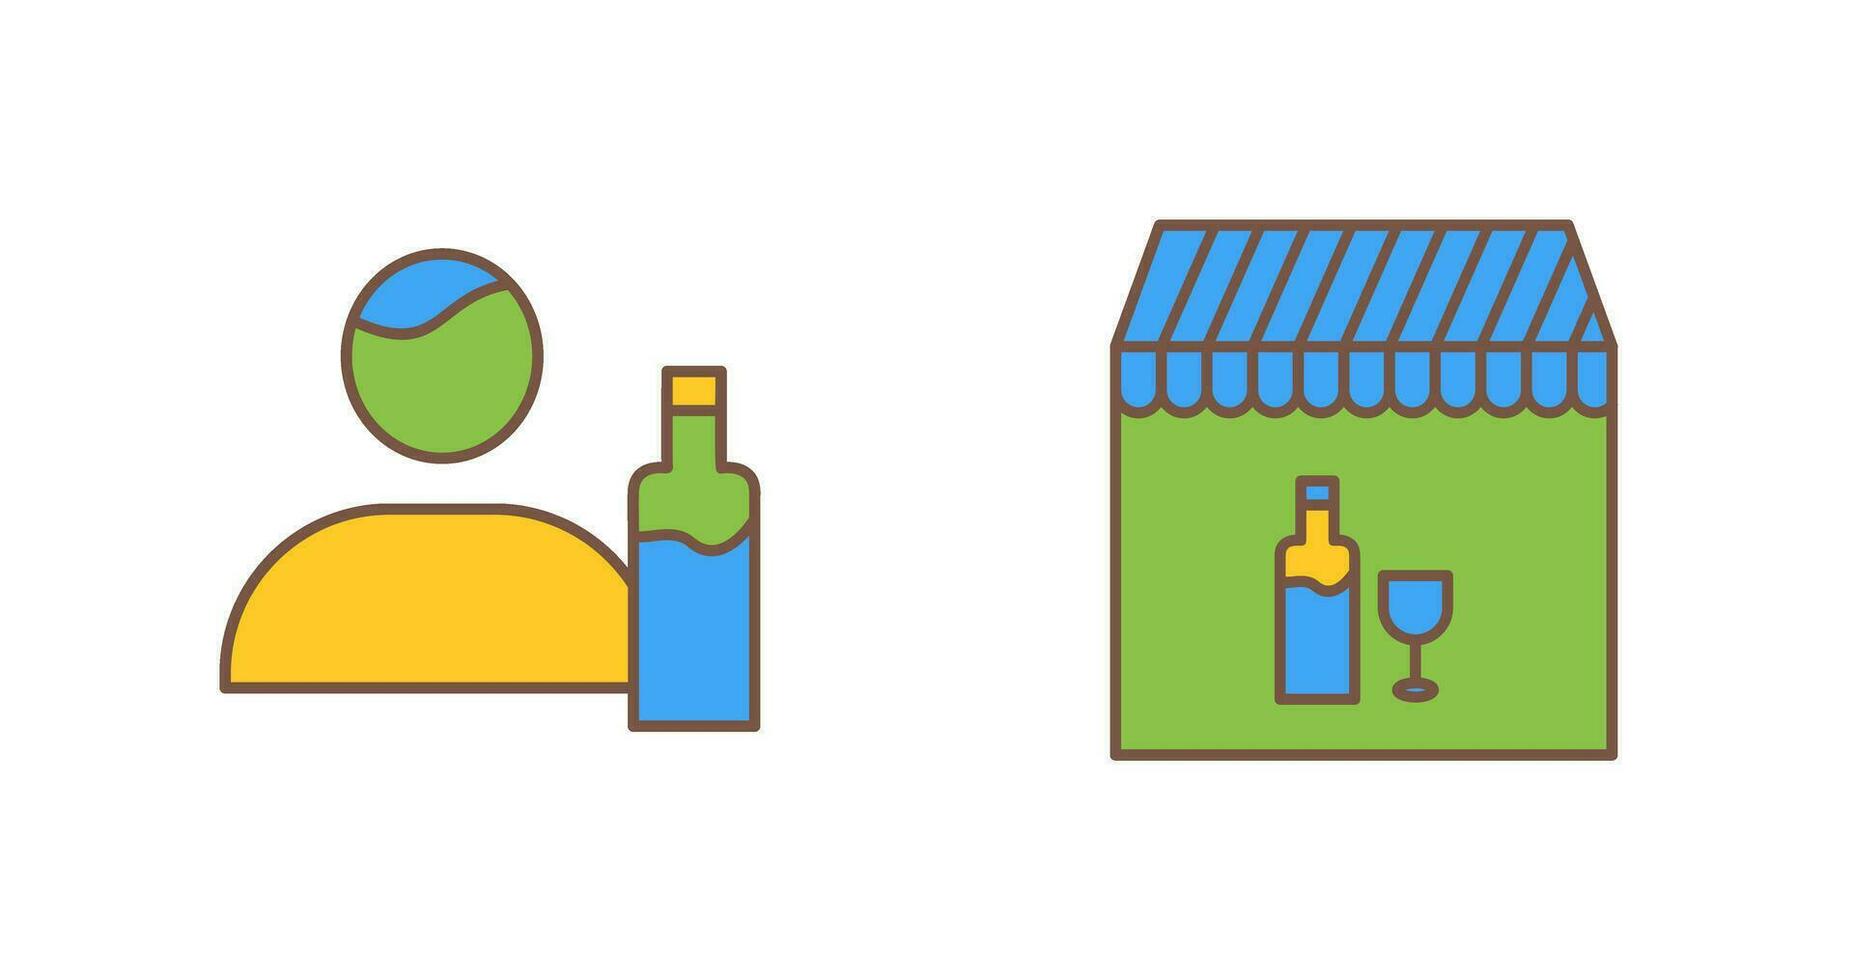 man drink and Cafe bar Icon vector